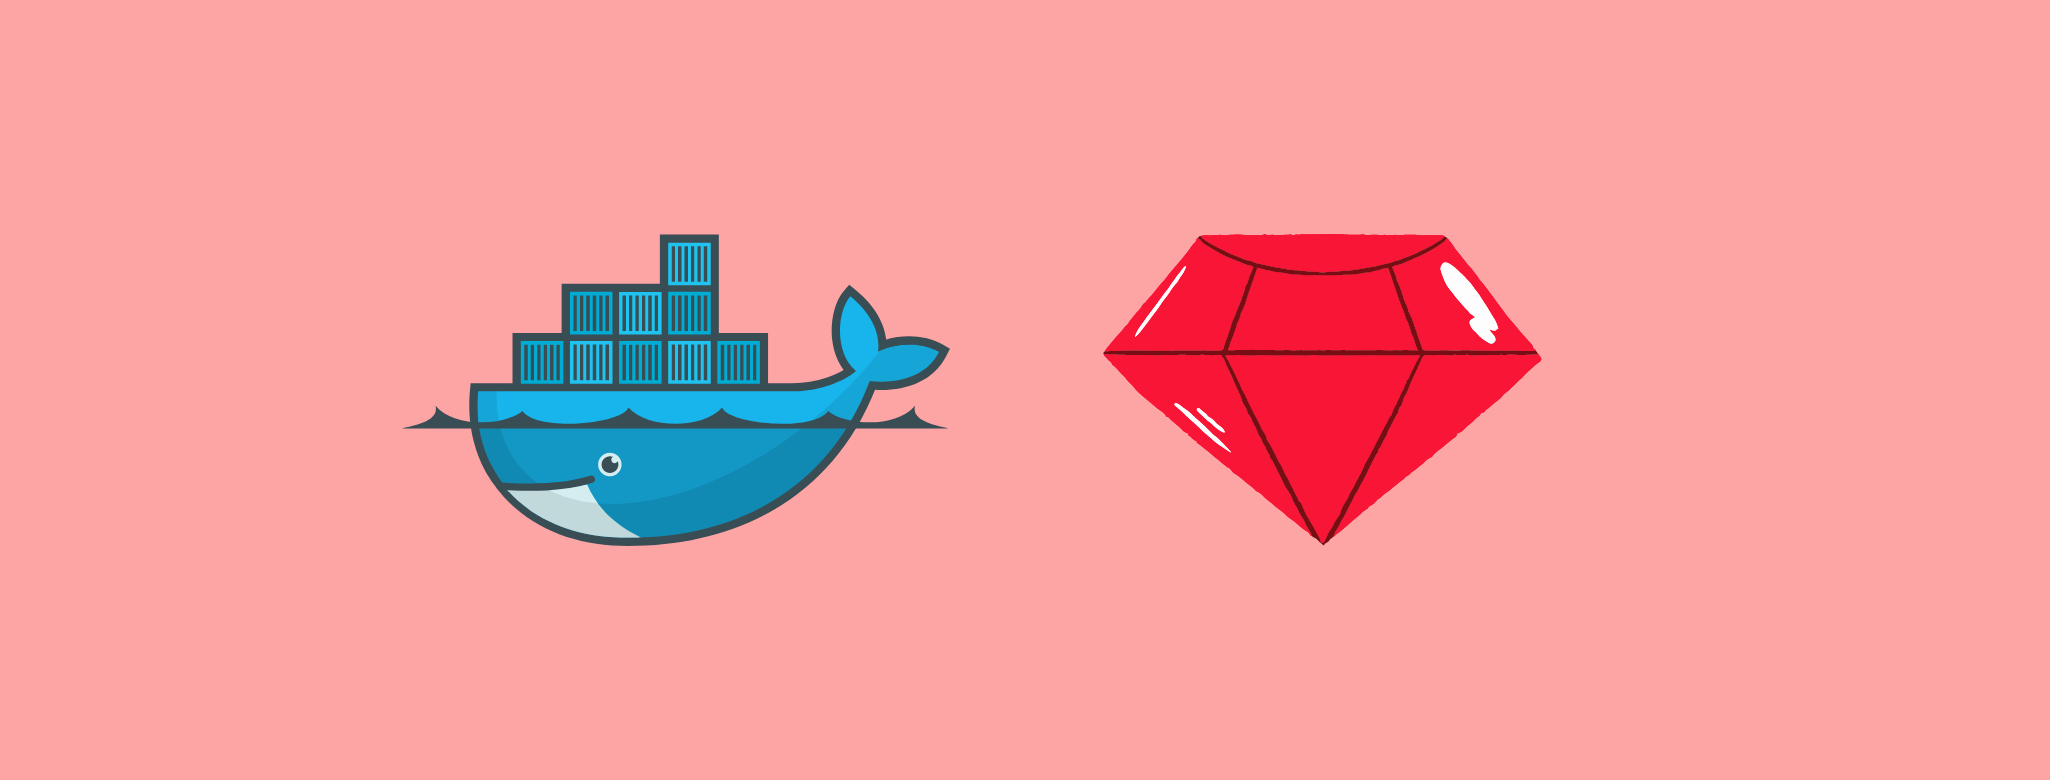 Understanding docker - playing with ruby containers